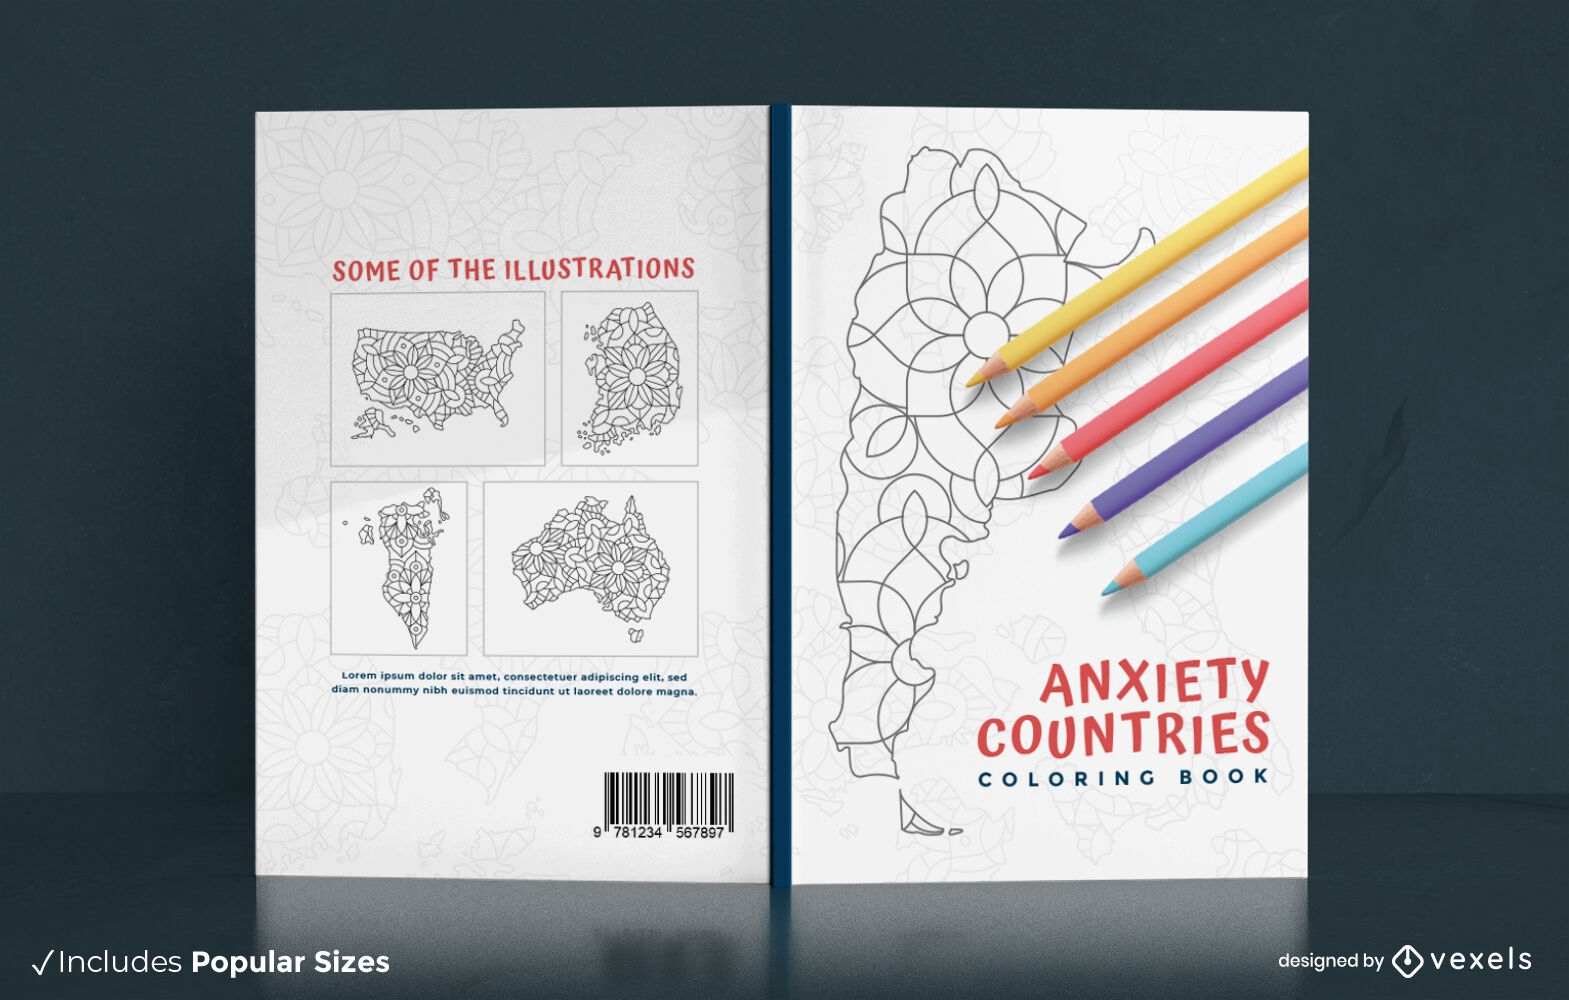 Anxiety countries coloring book cover design